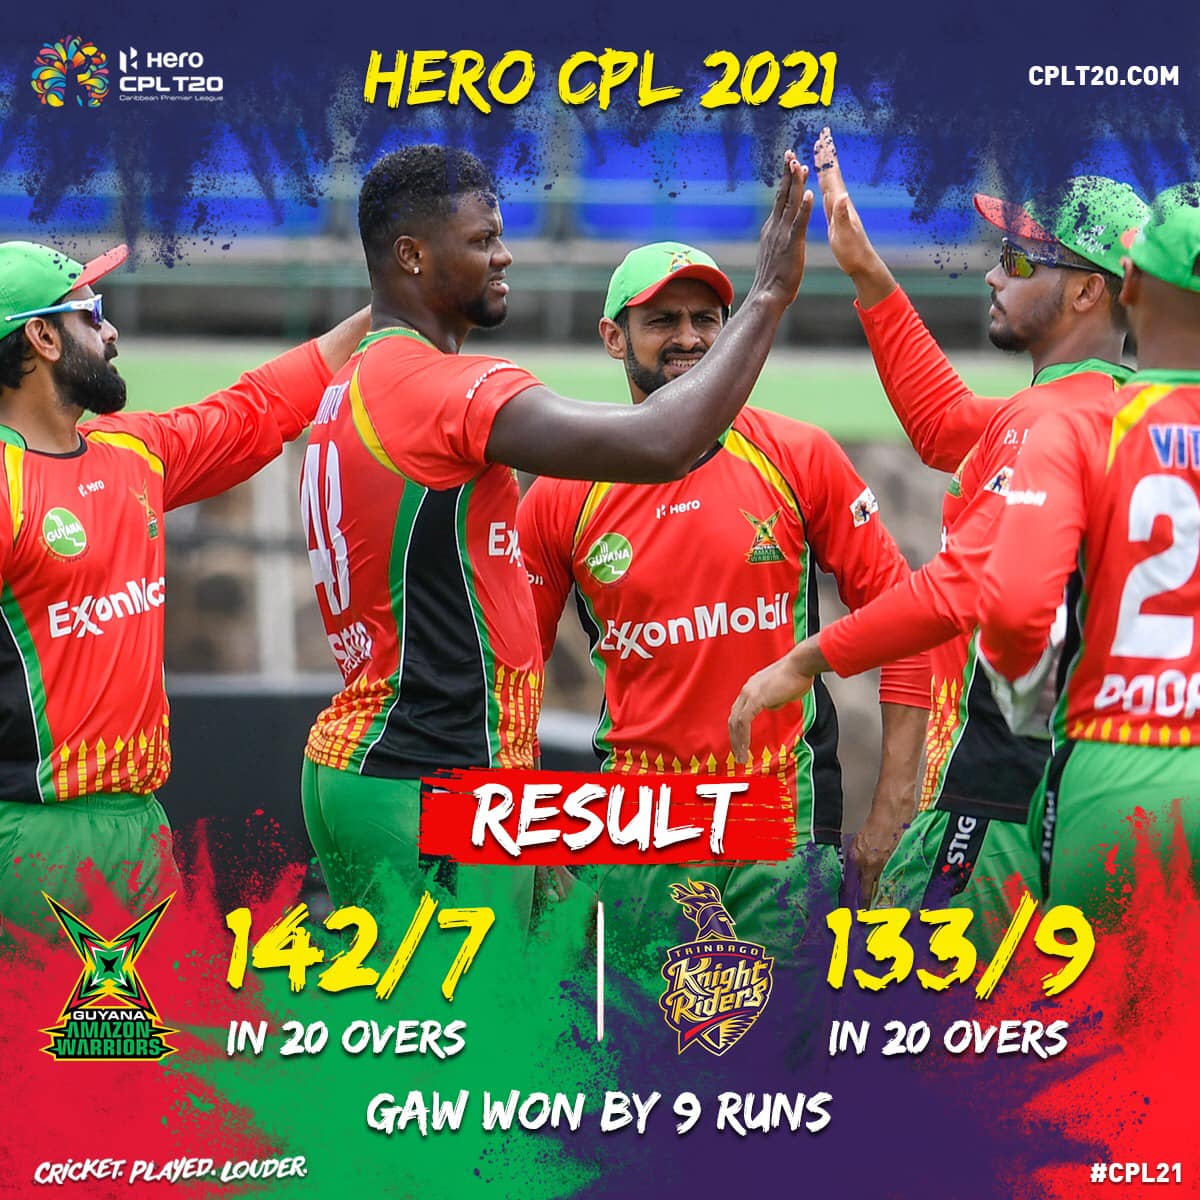 It’s all over at Warner Park and the Guyana Amazon Warriors have won by 9 runs